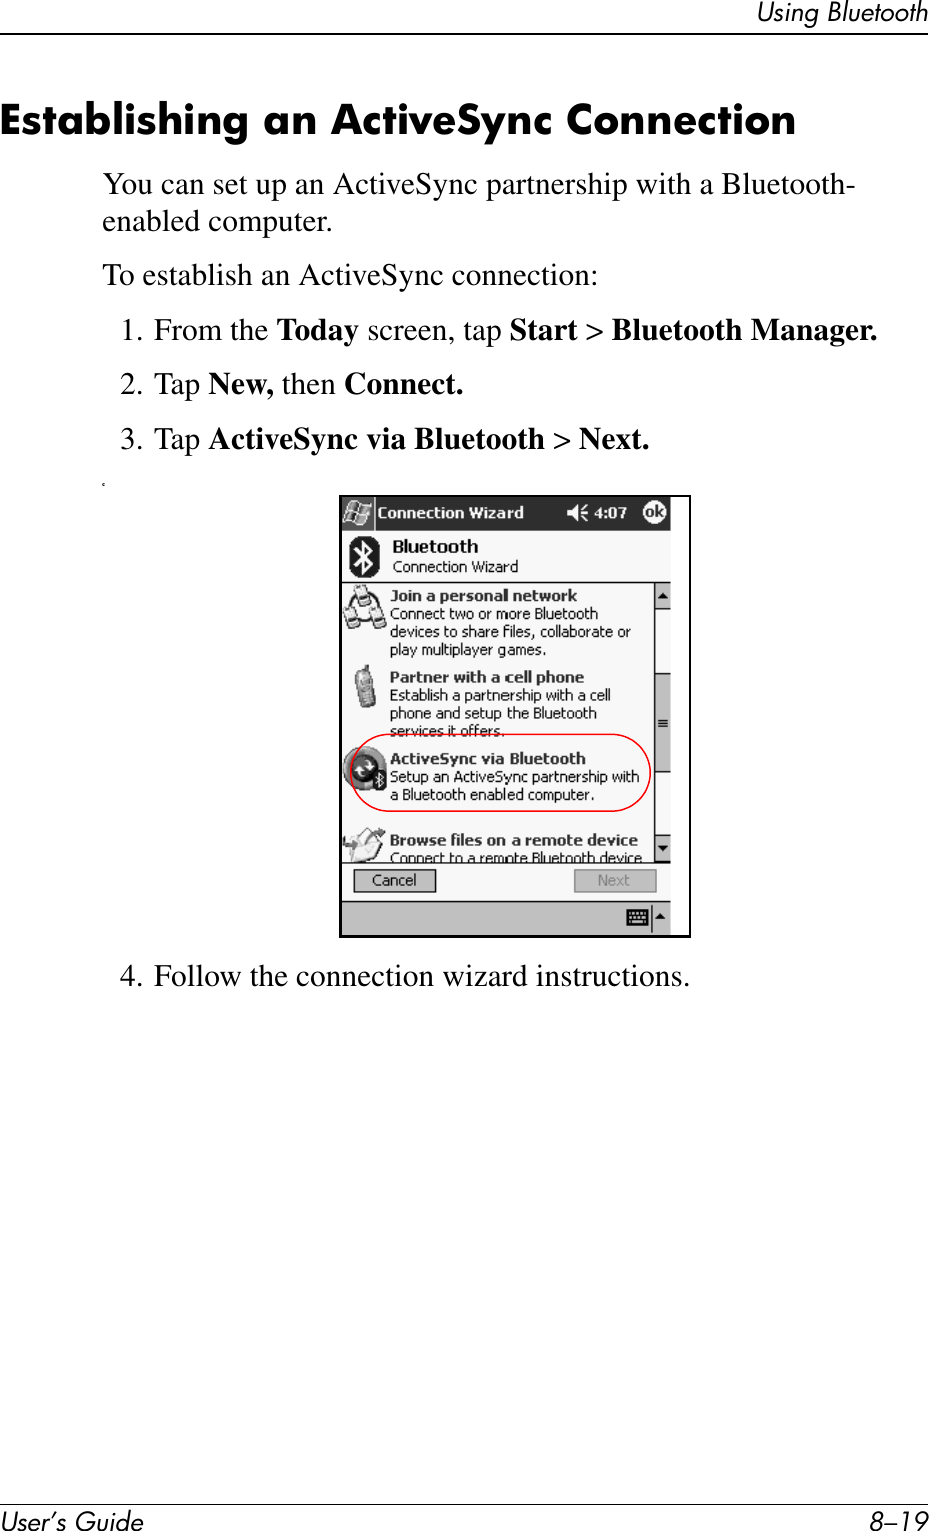 Using BluetoothUser’s Guide 8–19Establishing an ActiveSync ConnectionYou can set up an ActiveSync partnership with a Bluetooth- enabled computer.To establish an ActiveSync connection:1. From the Today screen, tap Start &gt; Bluetooth Manager.2. Tap New, then Connect.3. Tap ActiveSync via Bluetooth &gt; Next.c4. Follow the connection wizard instructions.